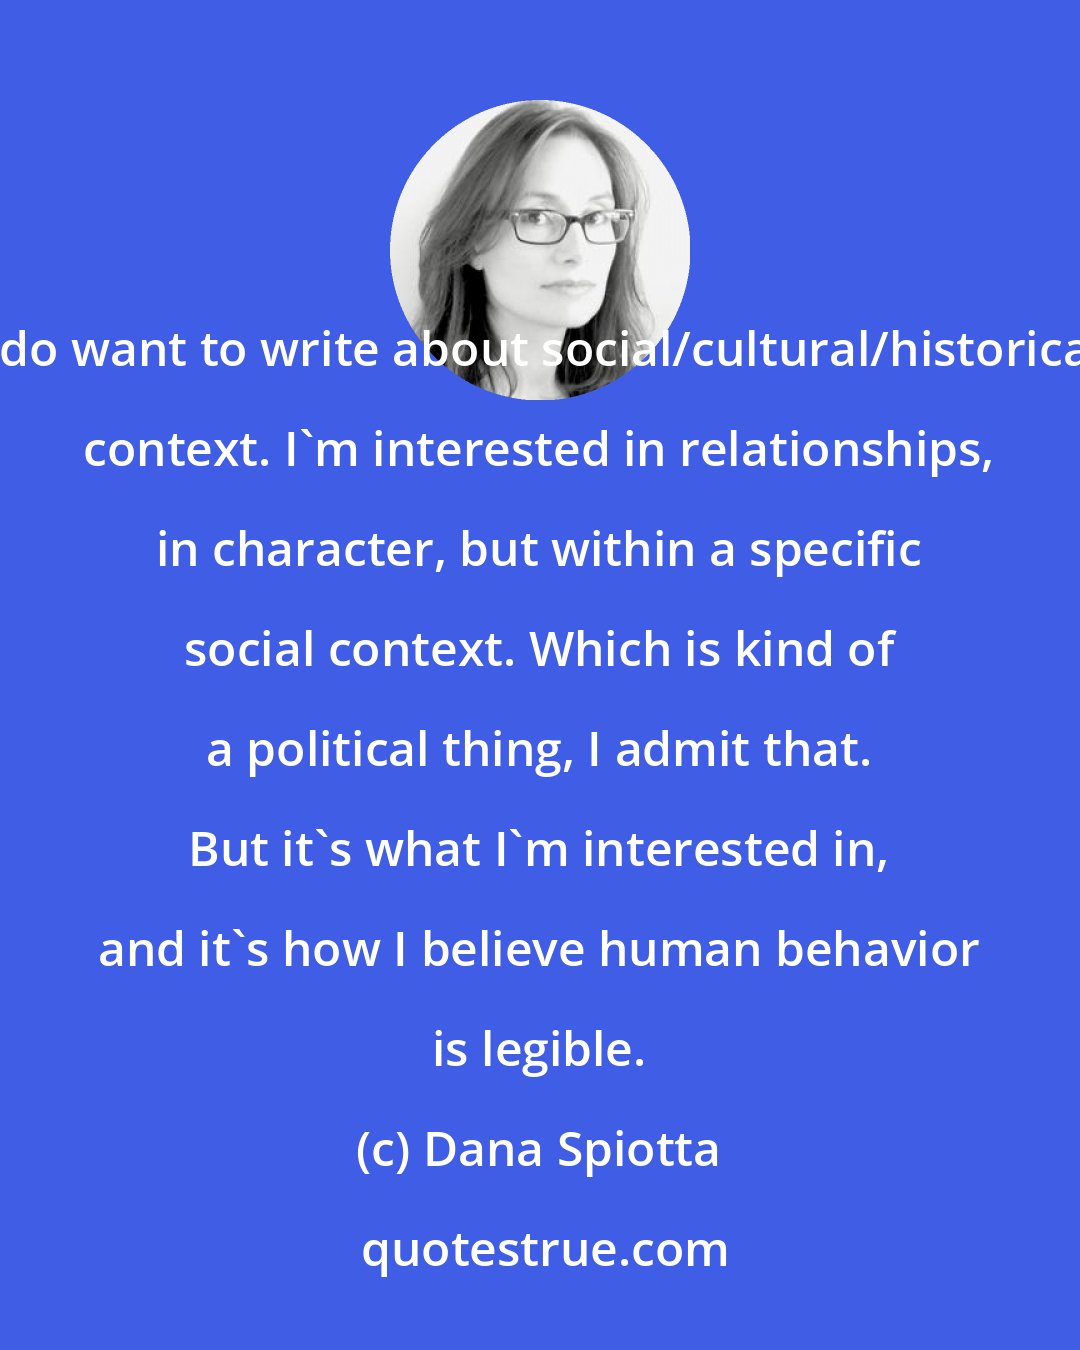 Dana Spiotta: I do want to write about social/cultural/historical context. I'm interested in relationships, in character, but within a specific social context. Which is kind of a political thing, I admit that. But it's what I'm interested in, and it's how I believe human behavior is legible.